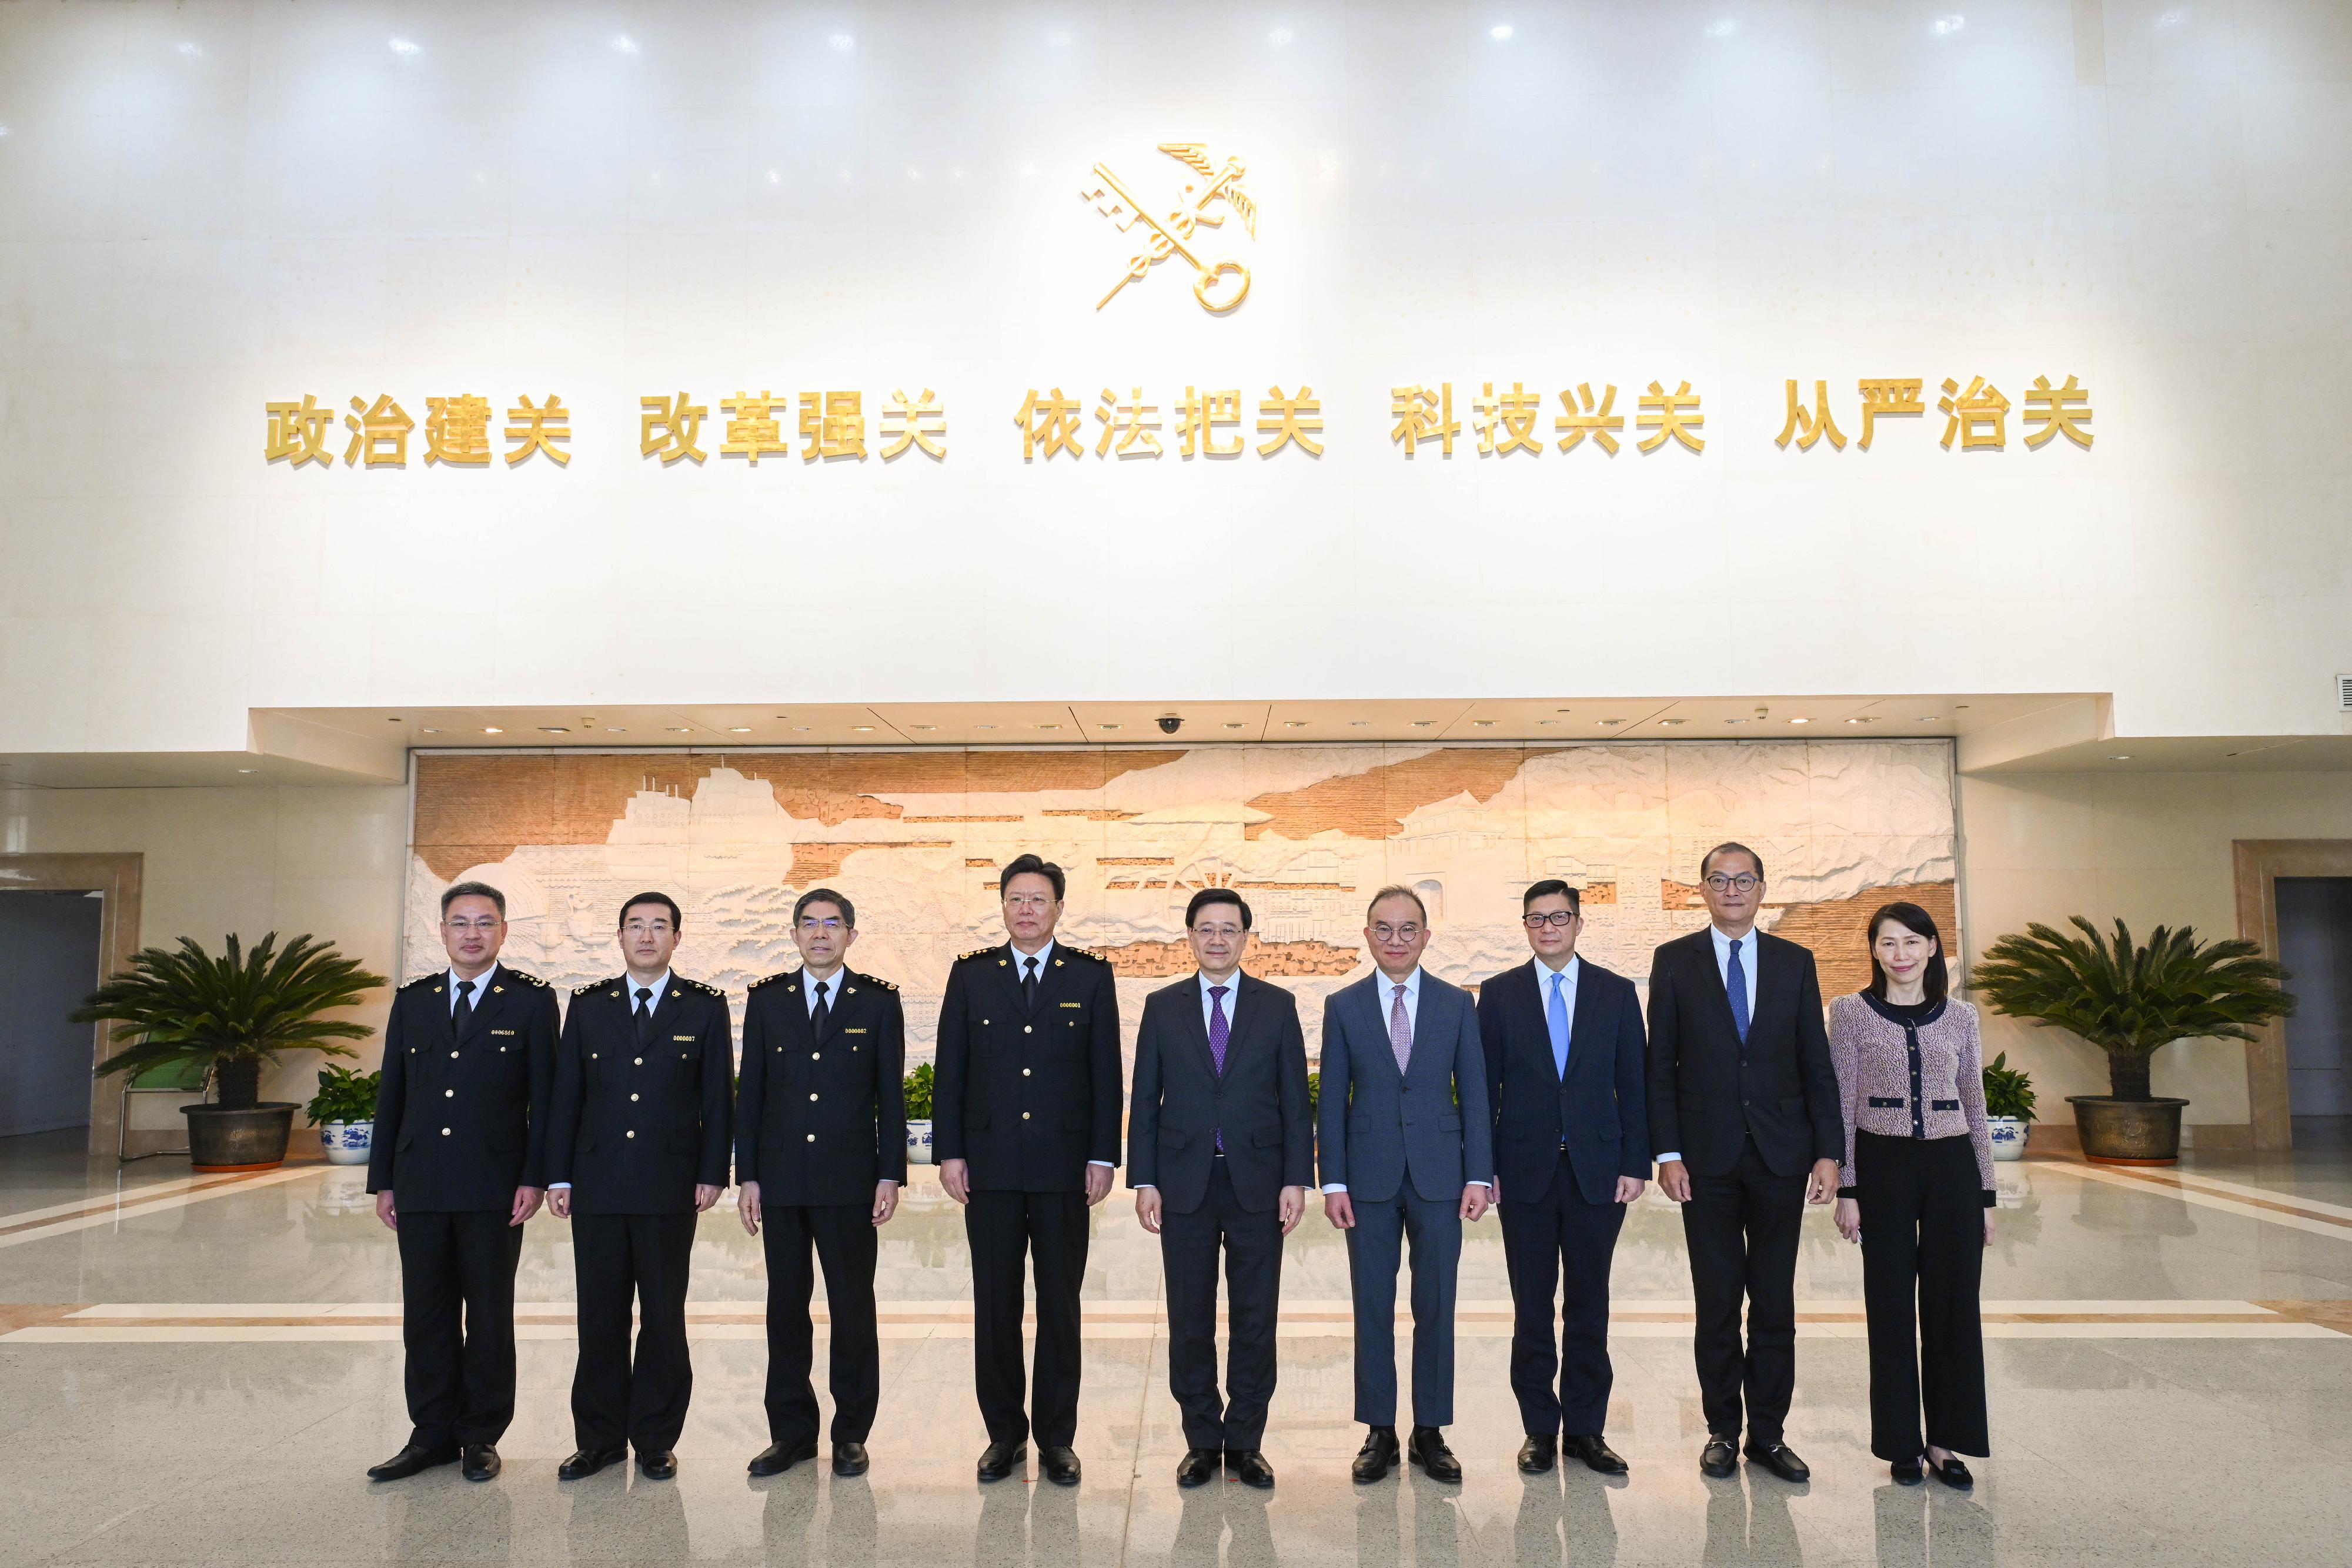 The Chief Executive, Mr John Lee (centre), meets with the Minister of General Administration of Customs, Mr Yu Jianhua (fourth left), in Beijing this afternoon (March 15). Also attending the meeting are the Secretary for Constitutional and Mainland Affairs, Mr Erick Tsang Kwok-wai (fourth right); the Secretary for Security, Mr Tang Ping-keung (third right); and the Secretary for Health, Professor Lo Chung-mau (second right).